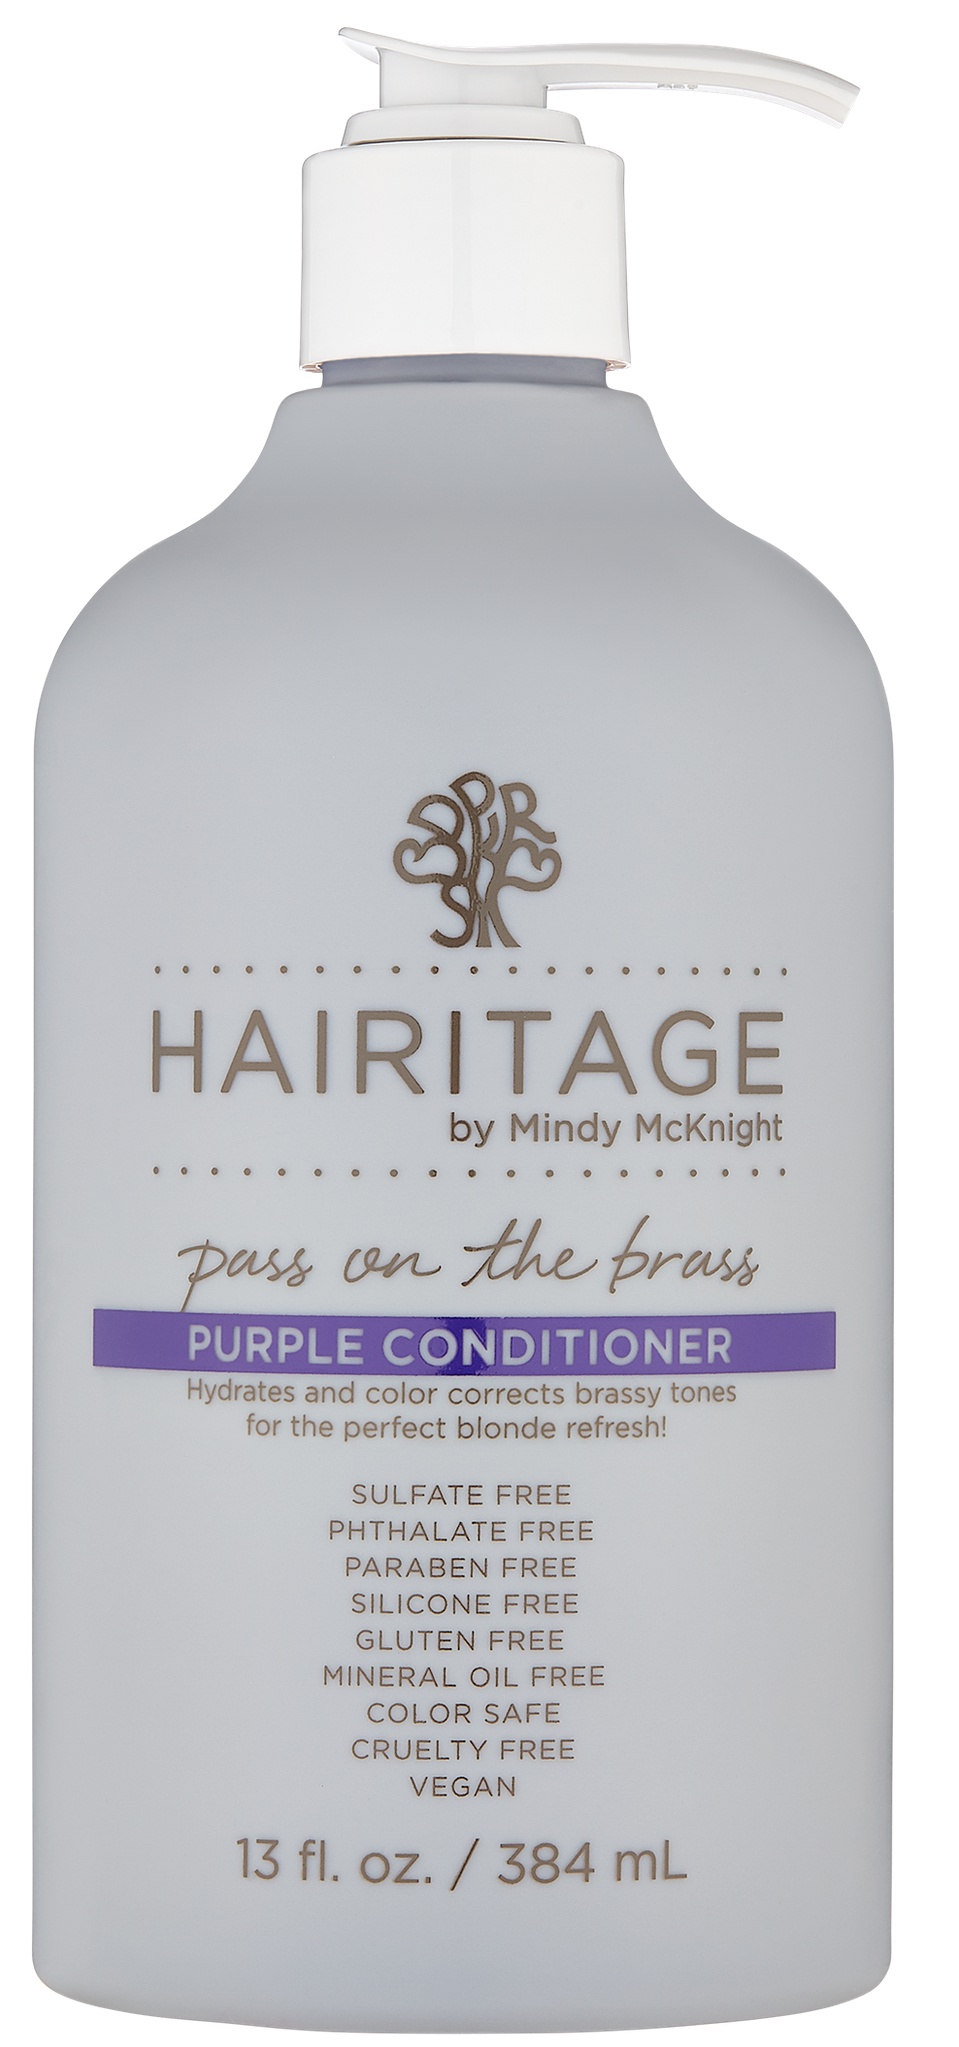 Hairitage by Mindy McKnight! Pass On The Brass Purple Conditioner